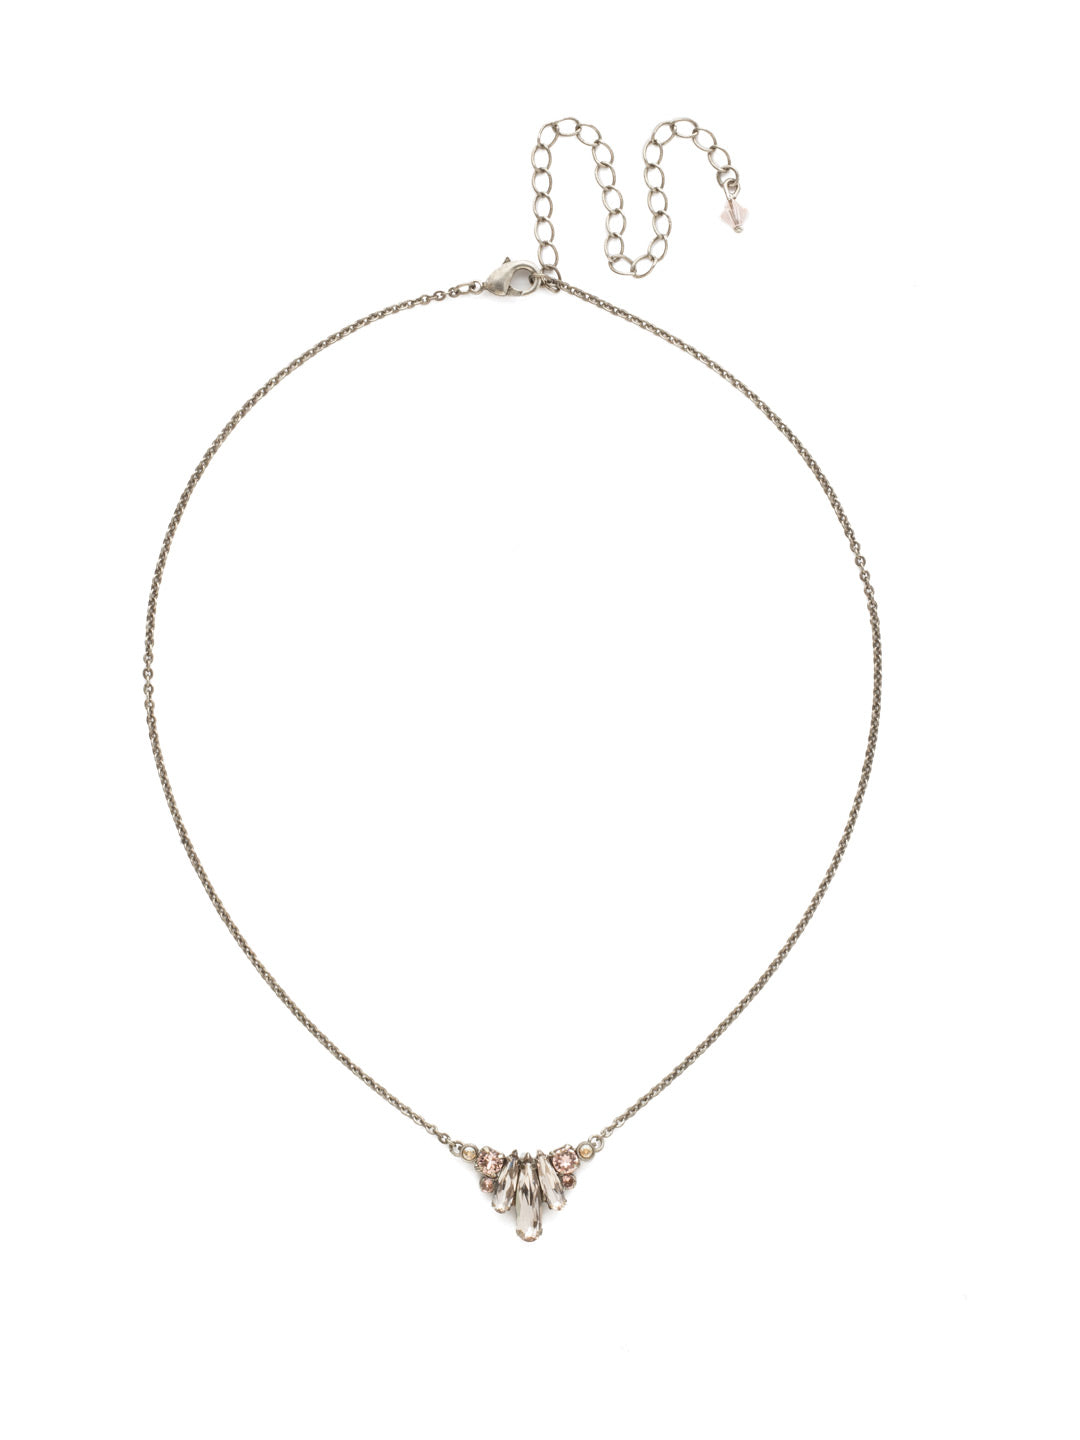 Sedum Pendant Necklace - NDT13ASSBL - Three elongated navettes are flanked by single round crystals for a simple, romantic feel.